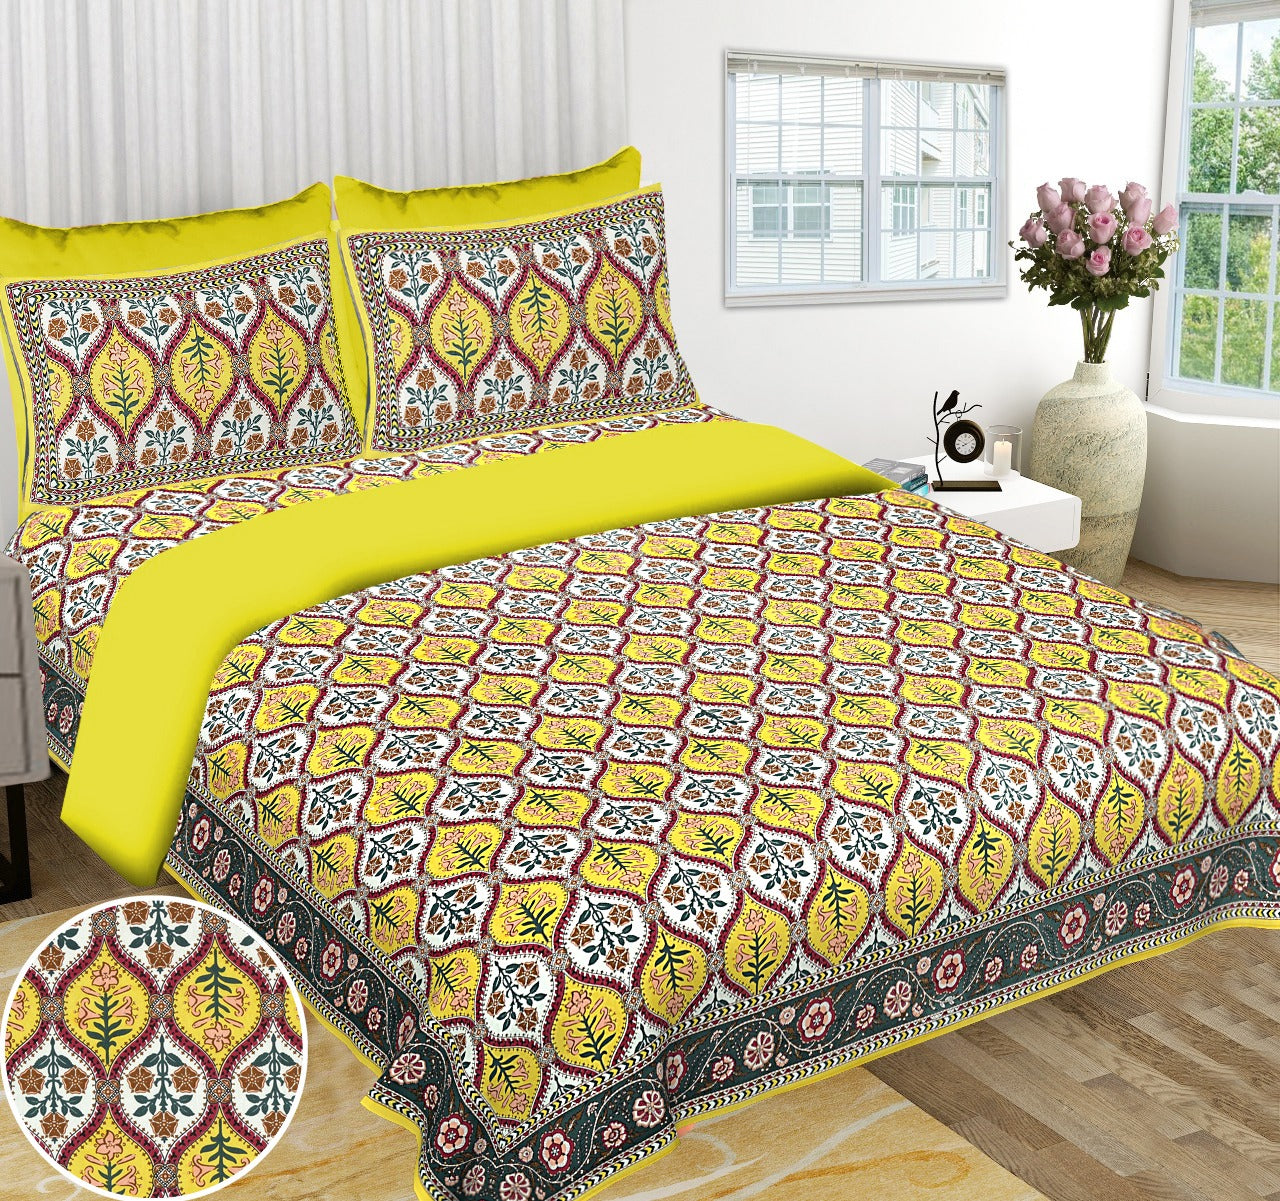 Braise Premium | Full Size 95 x 108 in | 100% Pure Cotton | Double Bedsheet with 2 Pillow Covers (BLS01)